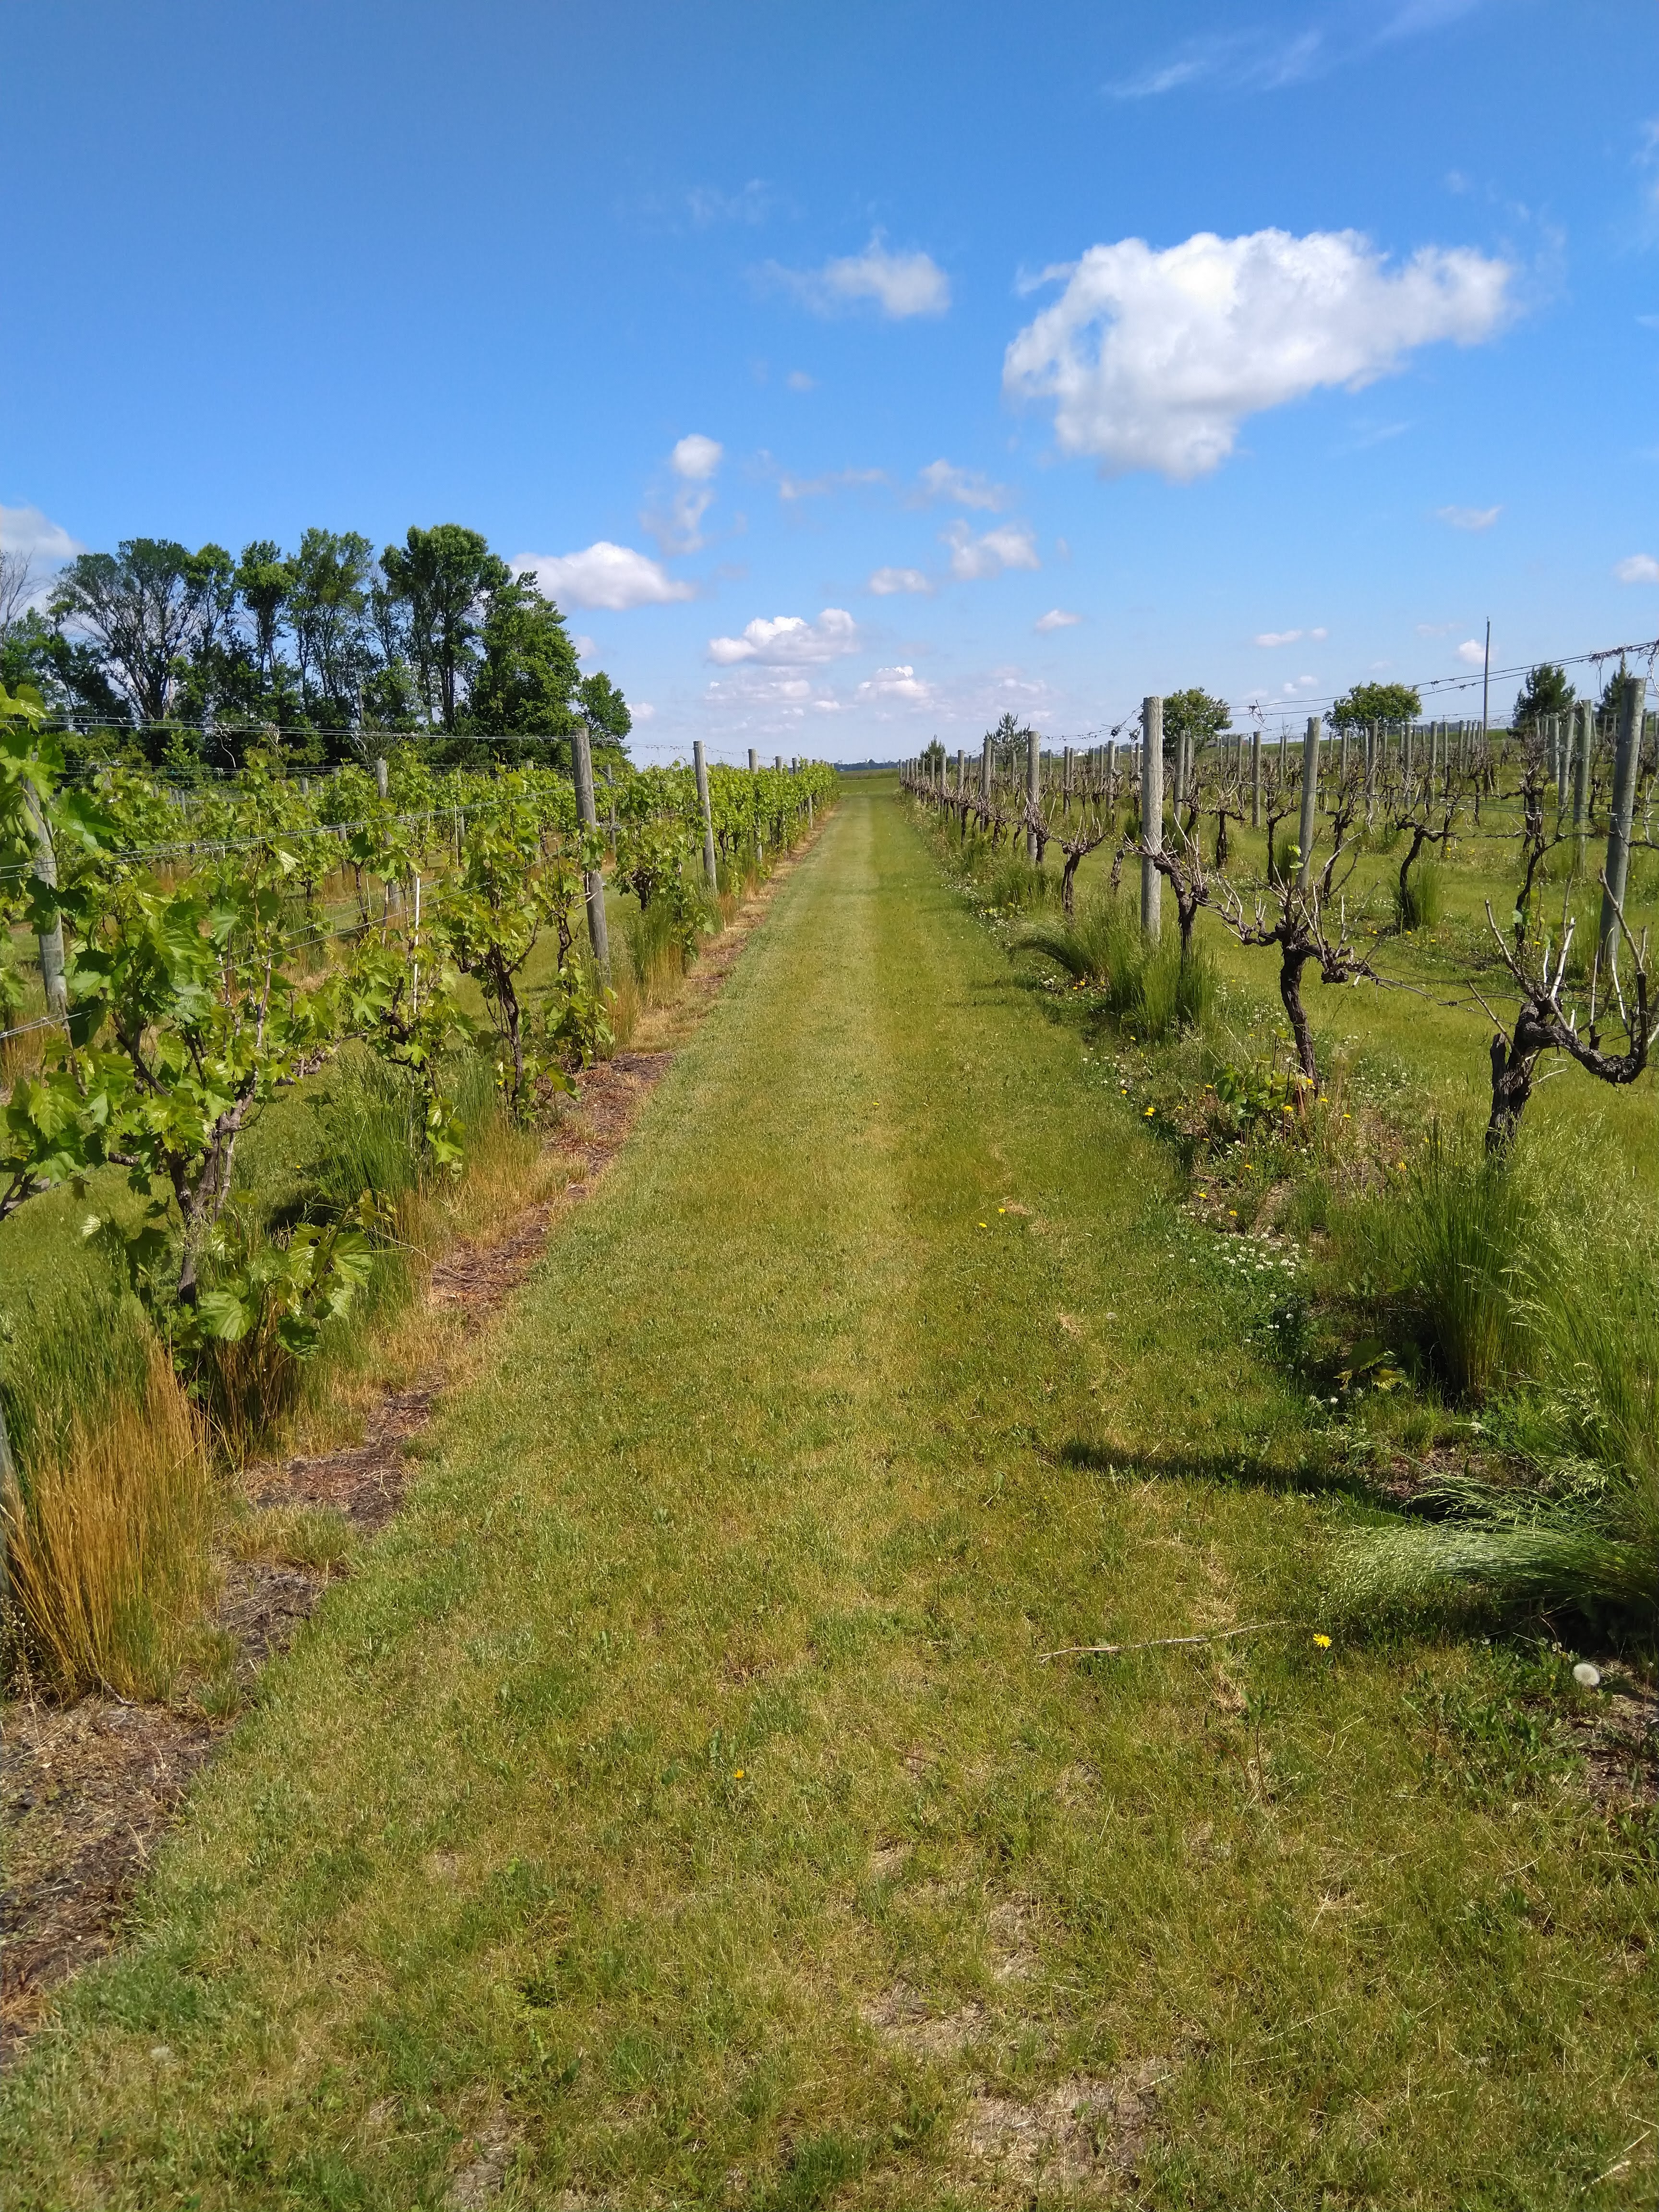 A vineyard with Frontenac blanc on the left and Marquette on the right, following winter injury